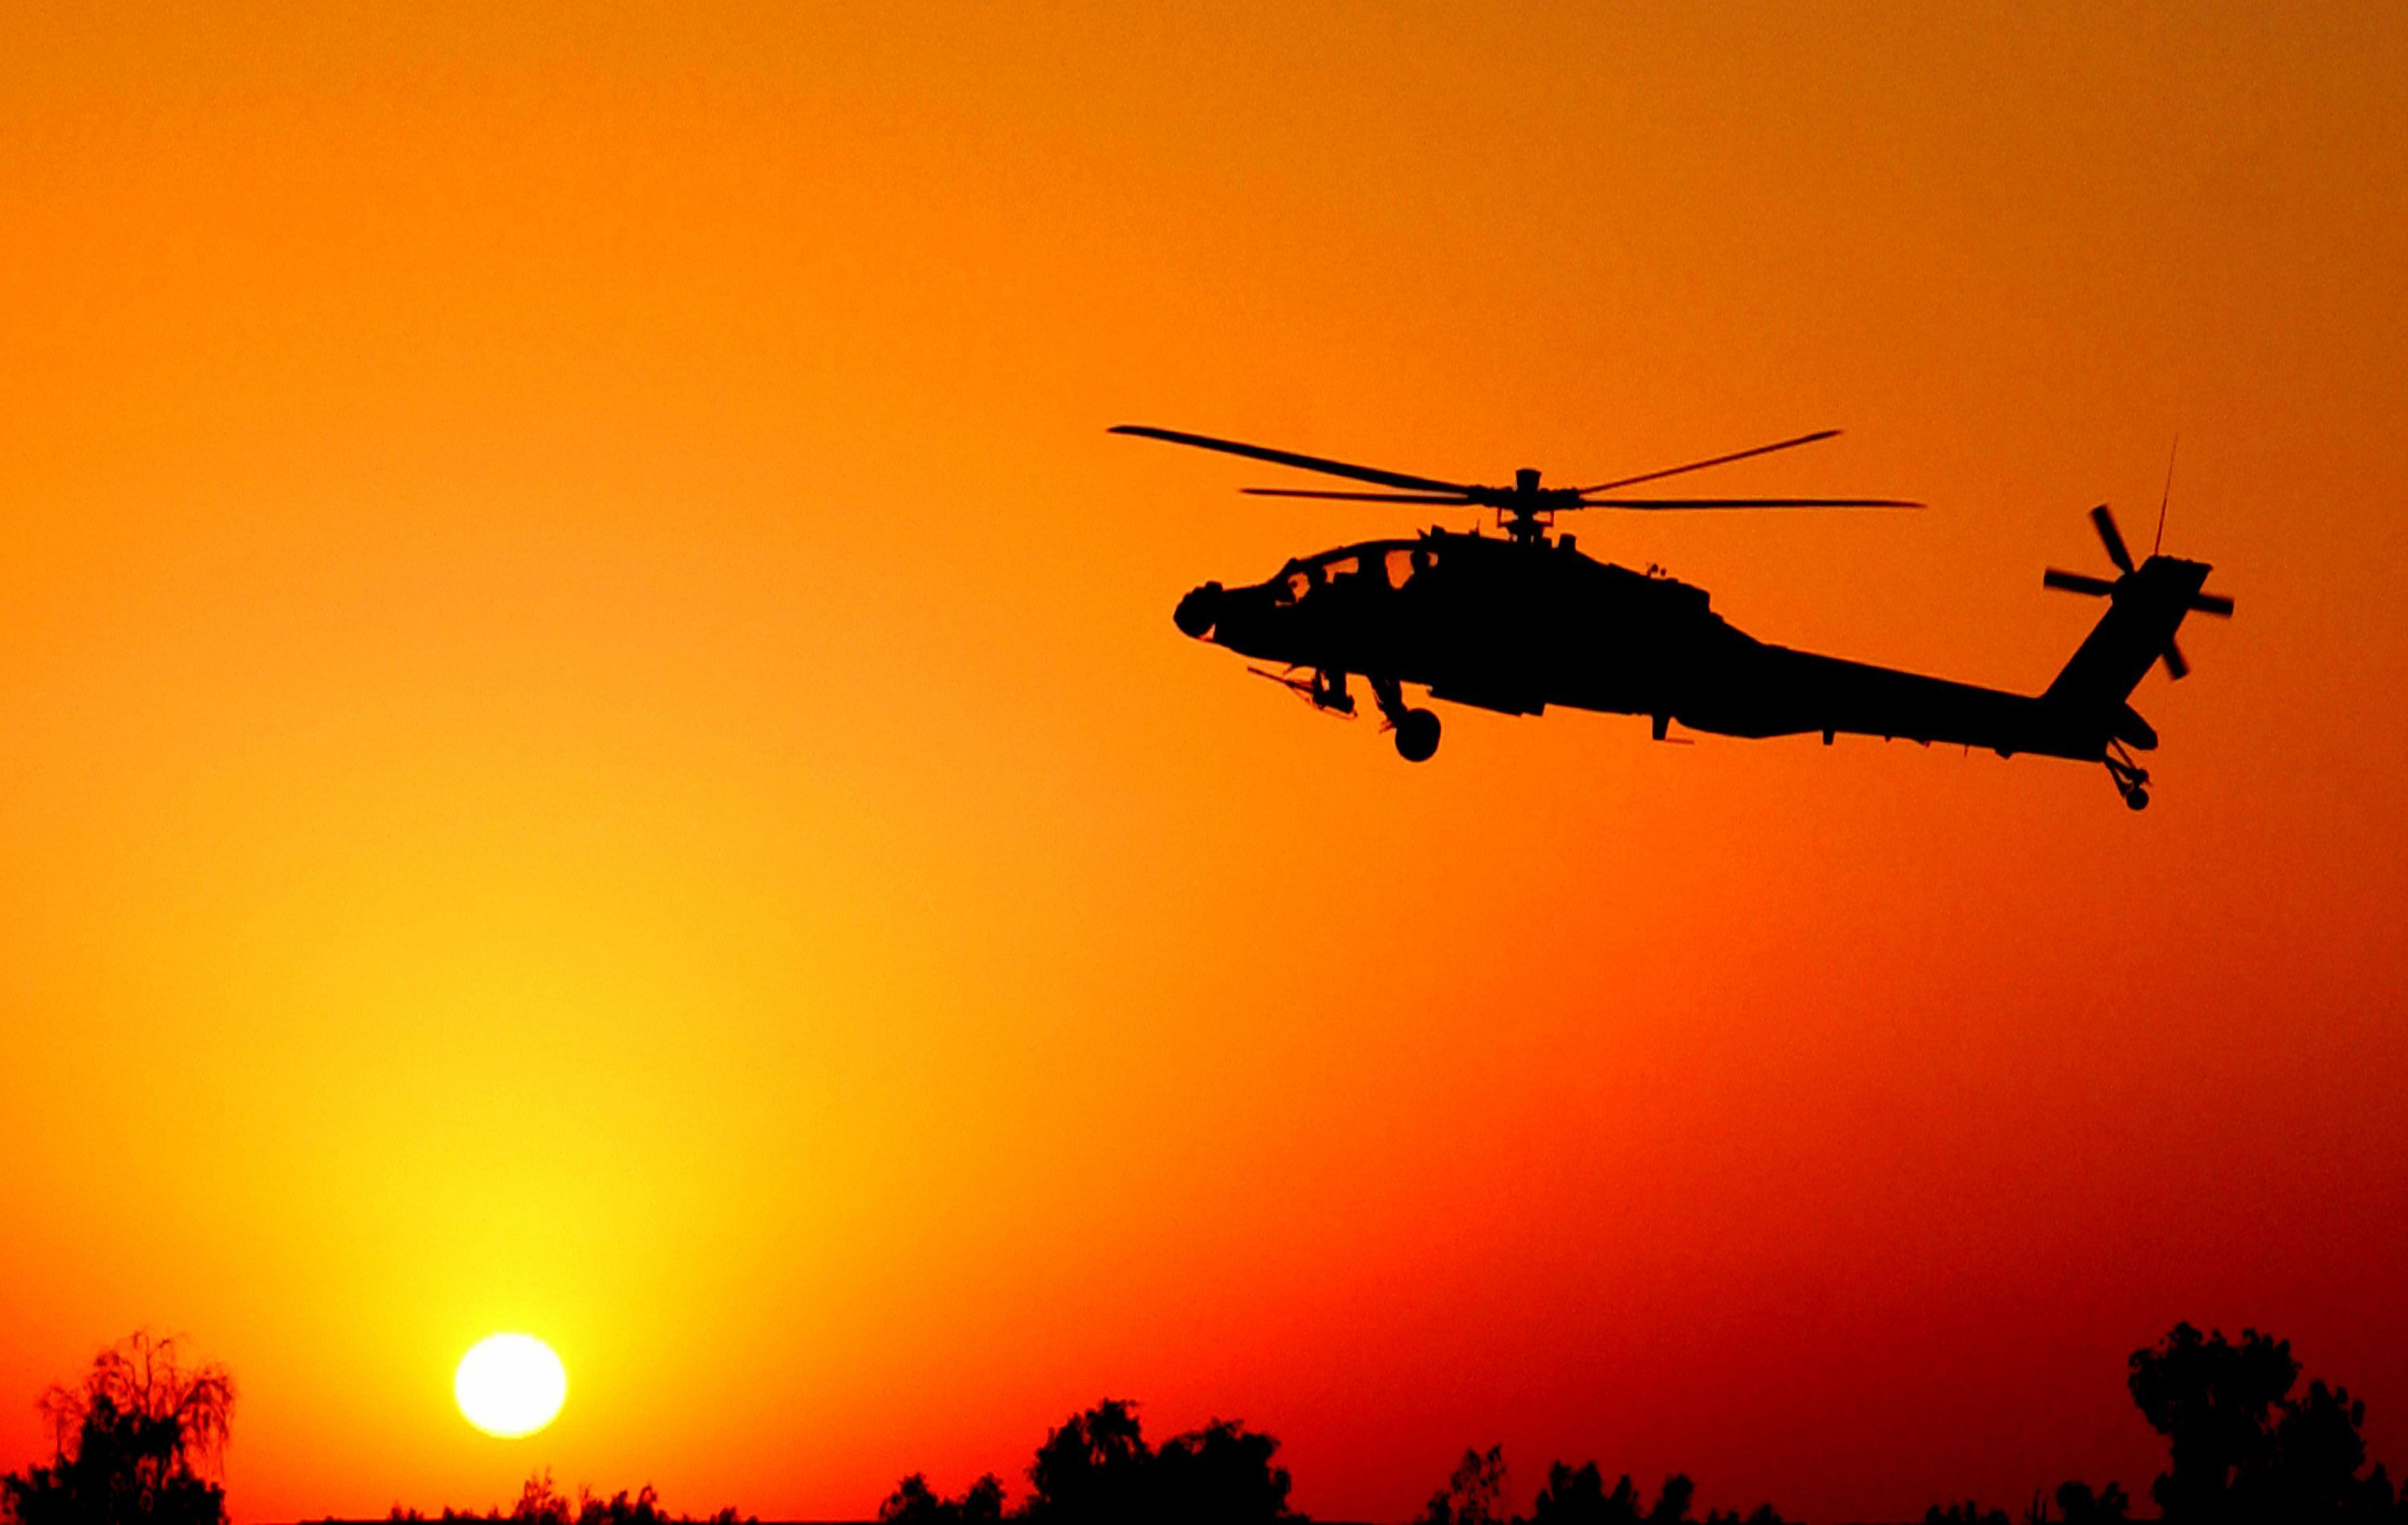 Military Wallpaper. Ah 64 apache, Military wallpaper, Military helicopter